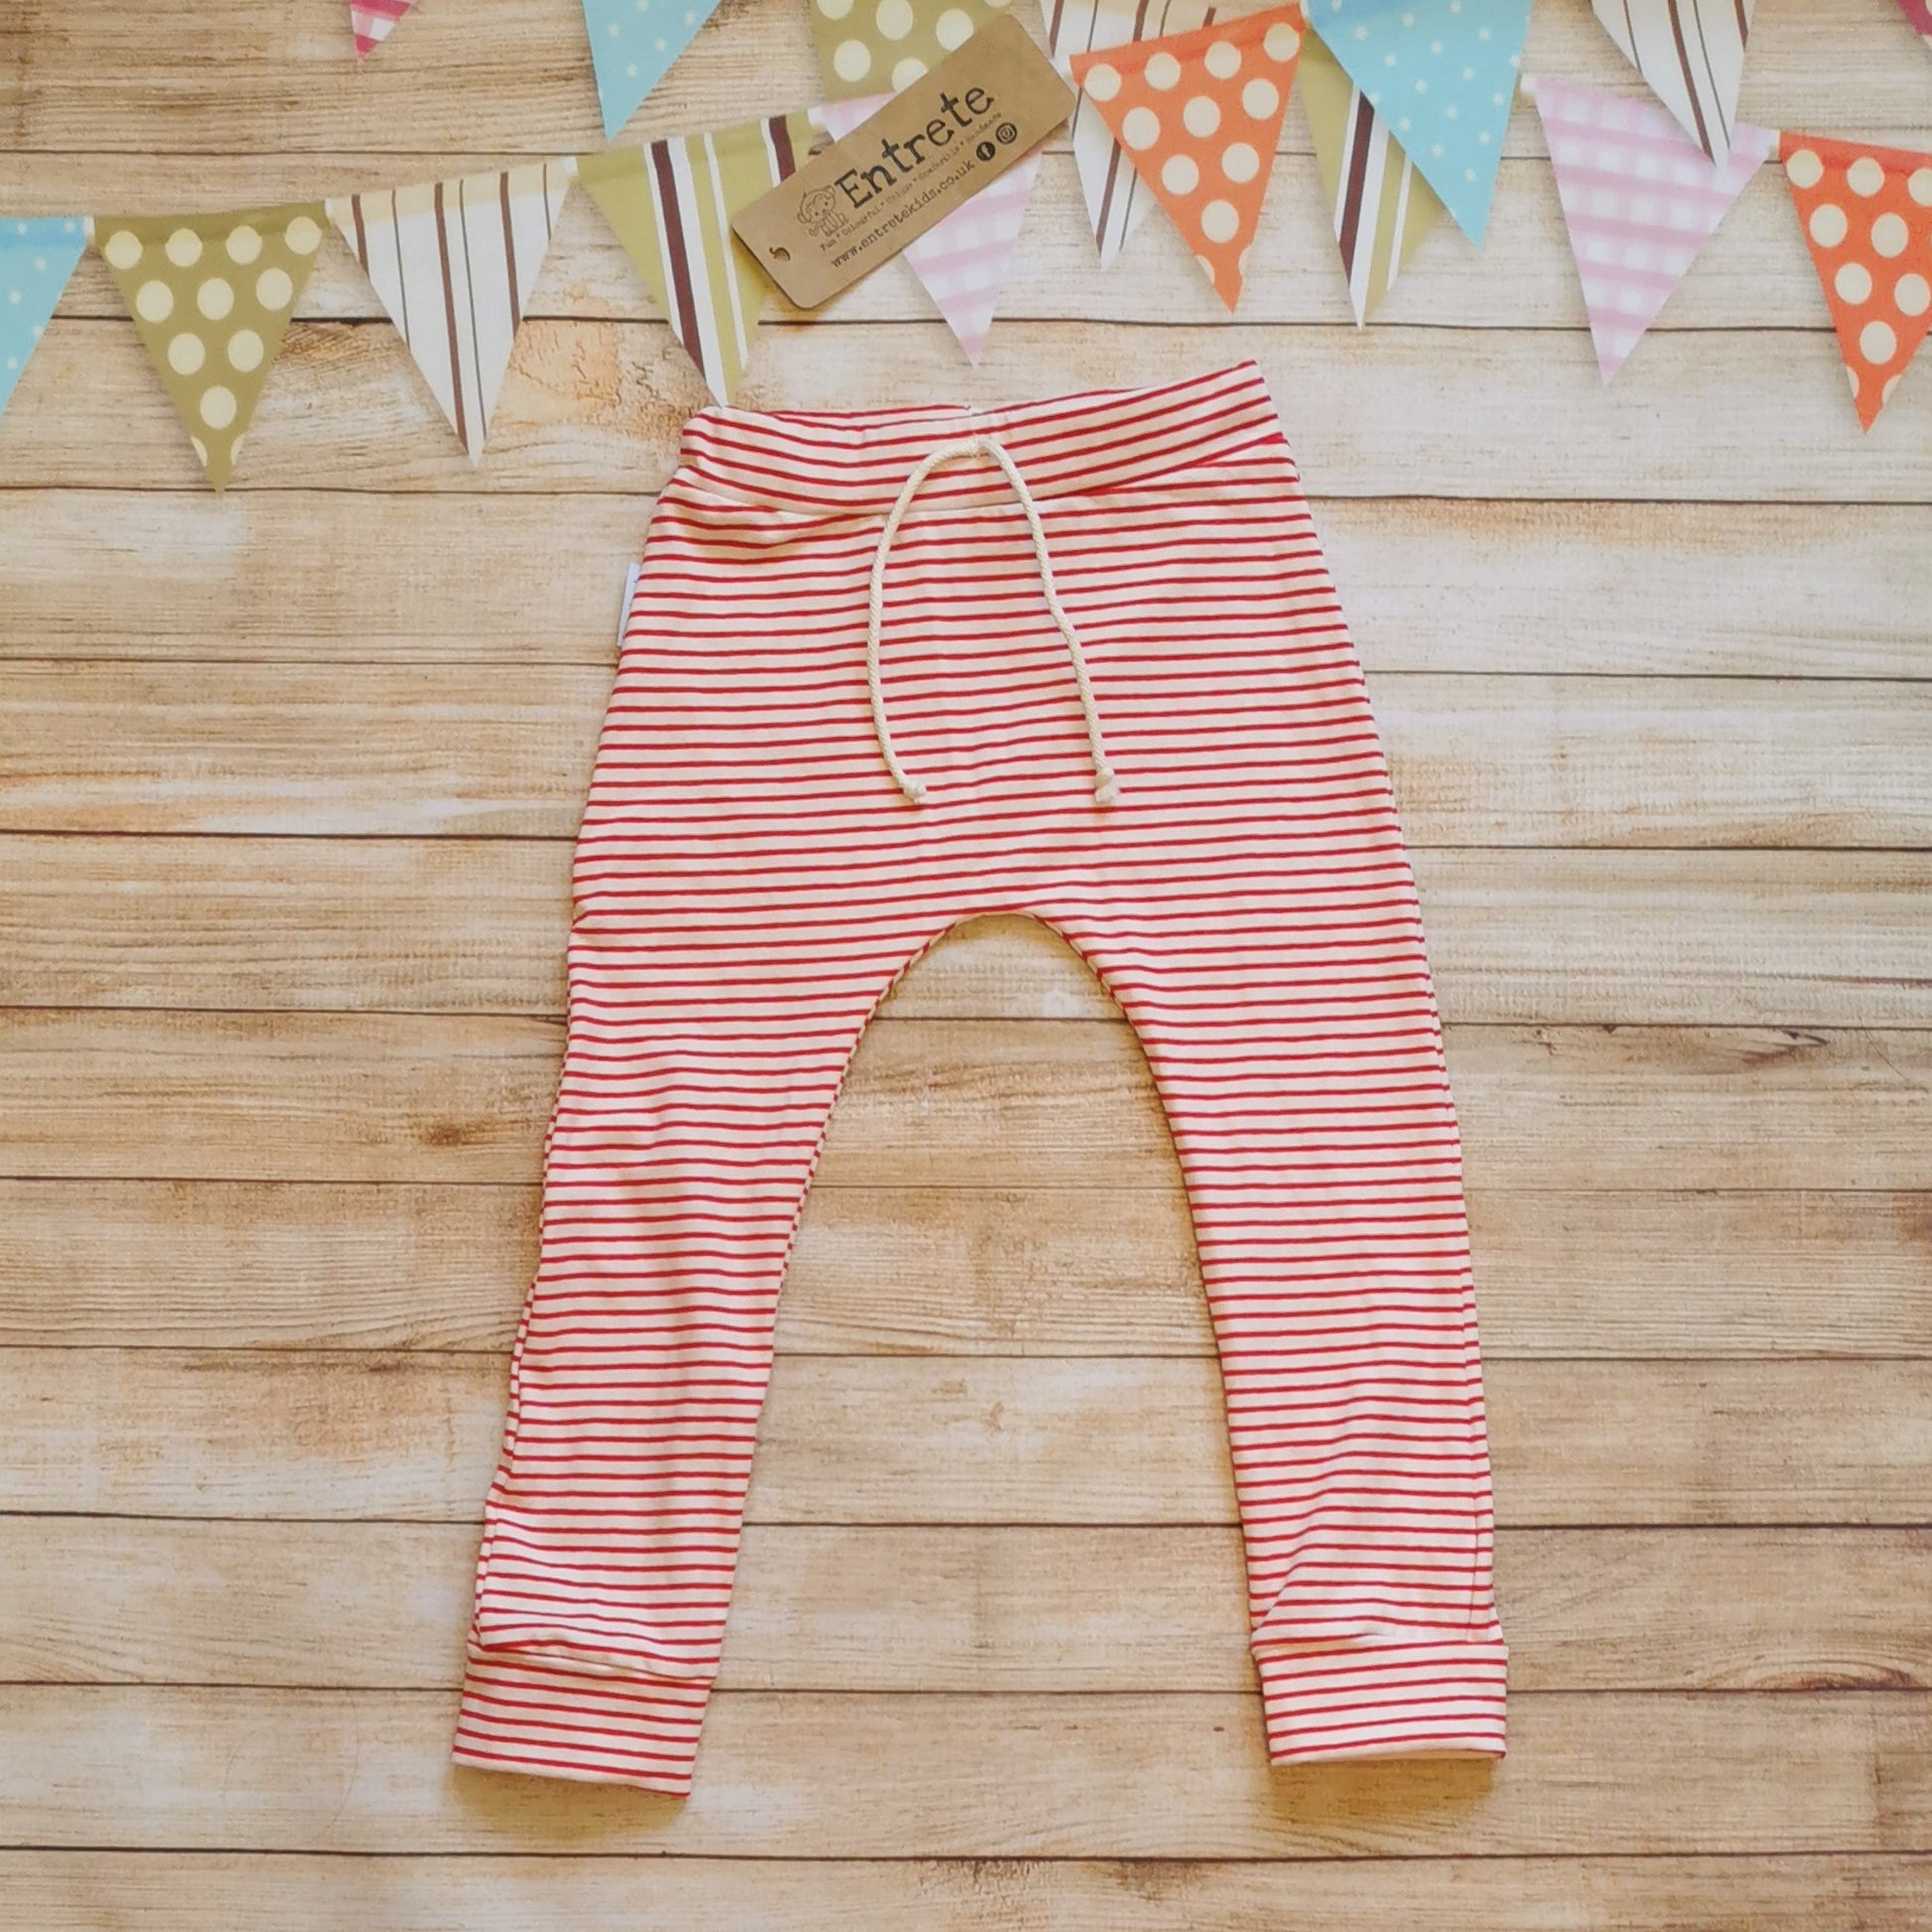 Soft and comfy harem joggers, handmade using red striped cotton jersey.